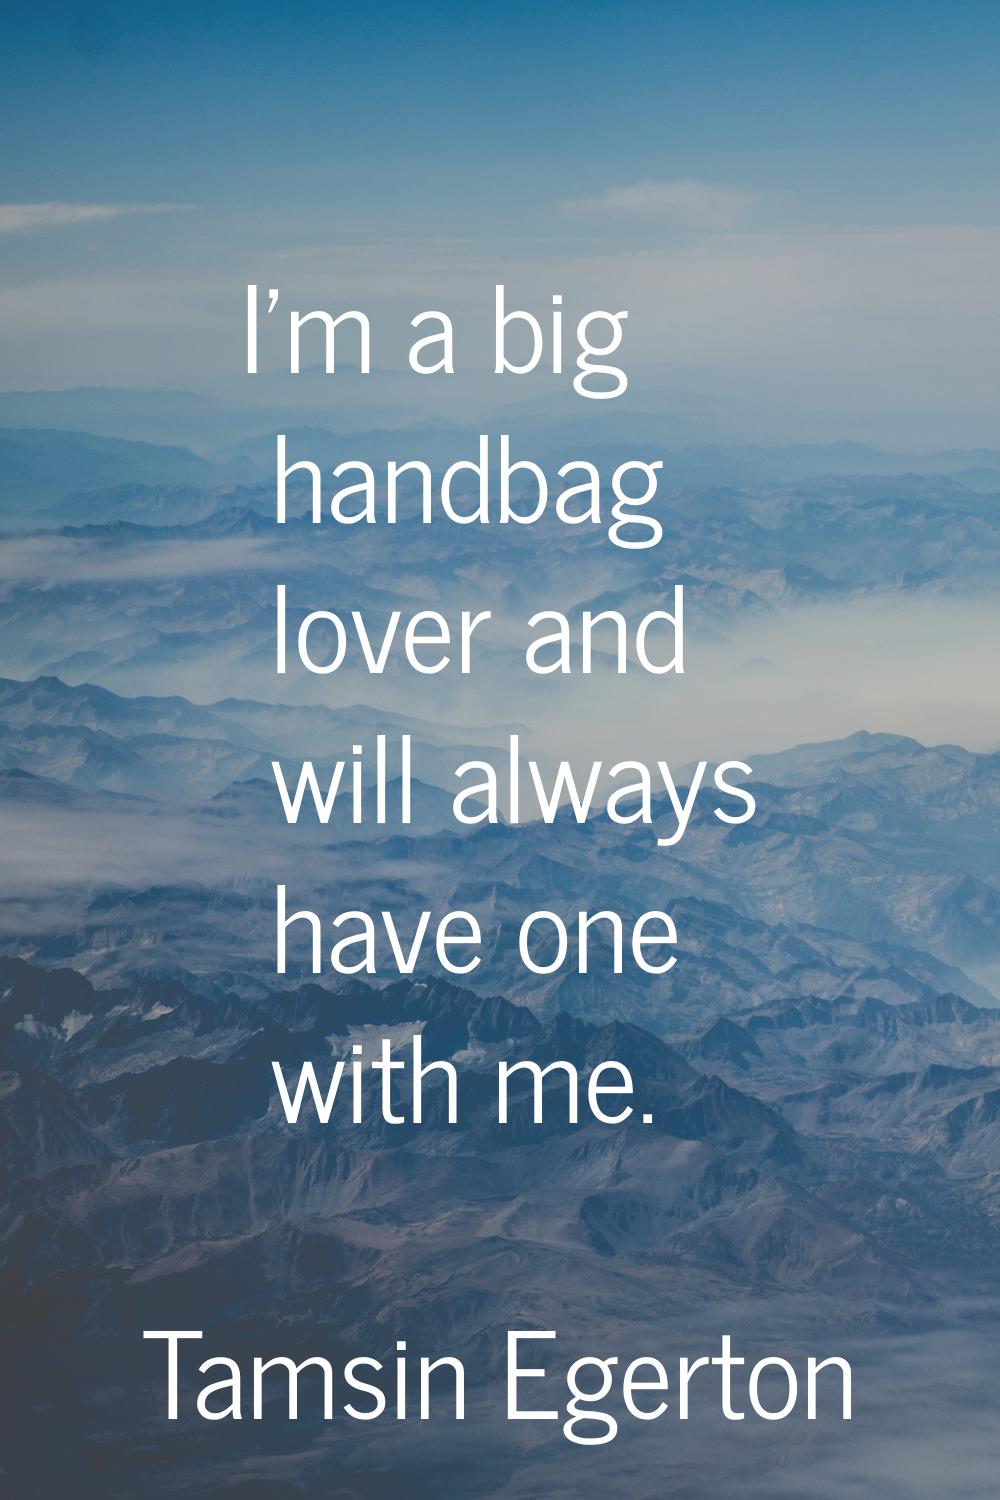 I'm a big handbag lover and will always have one with me.